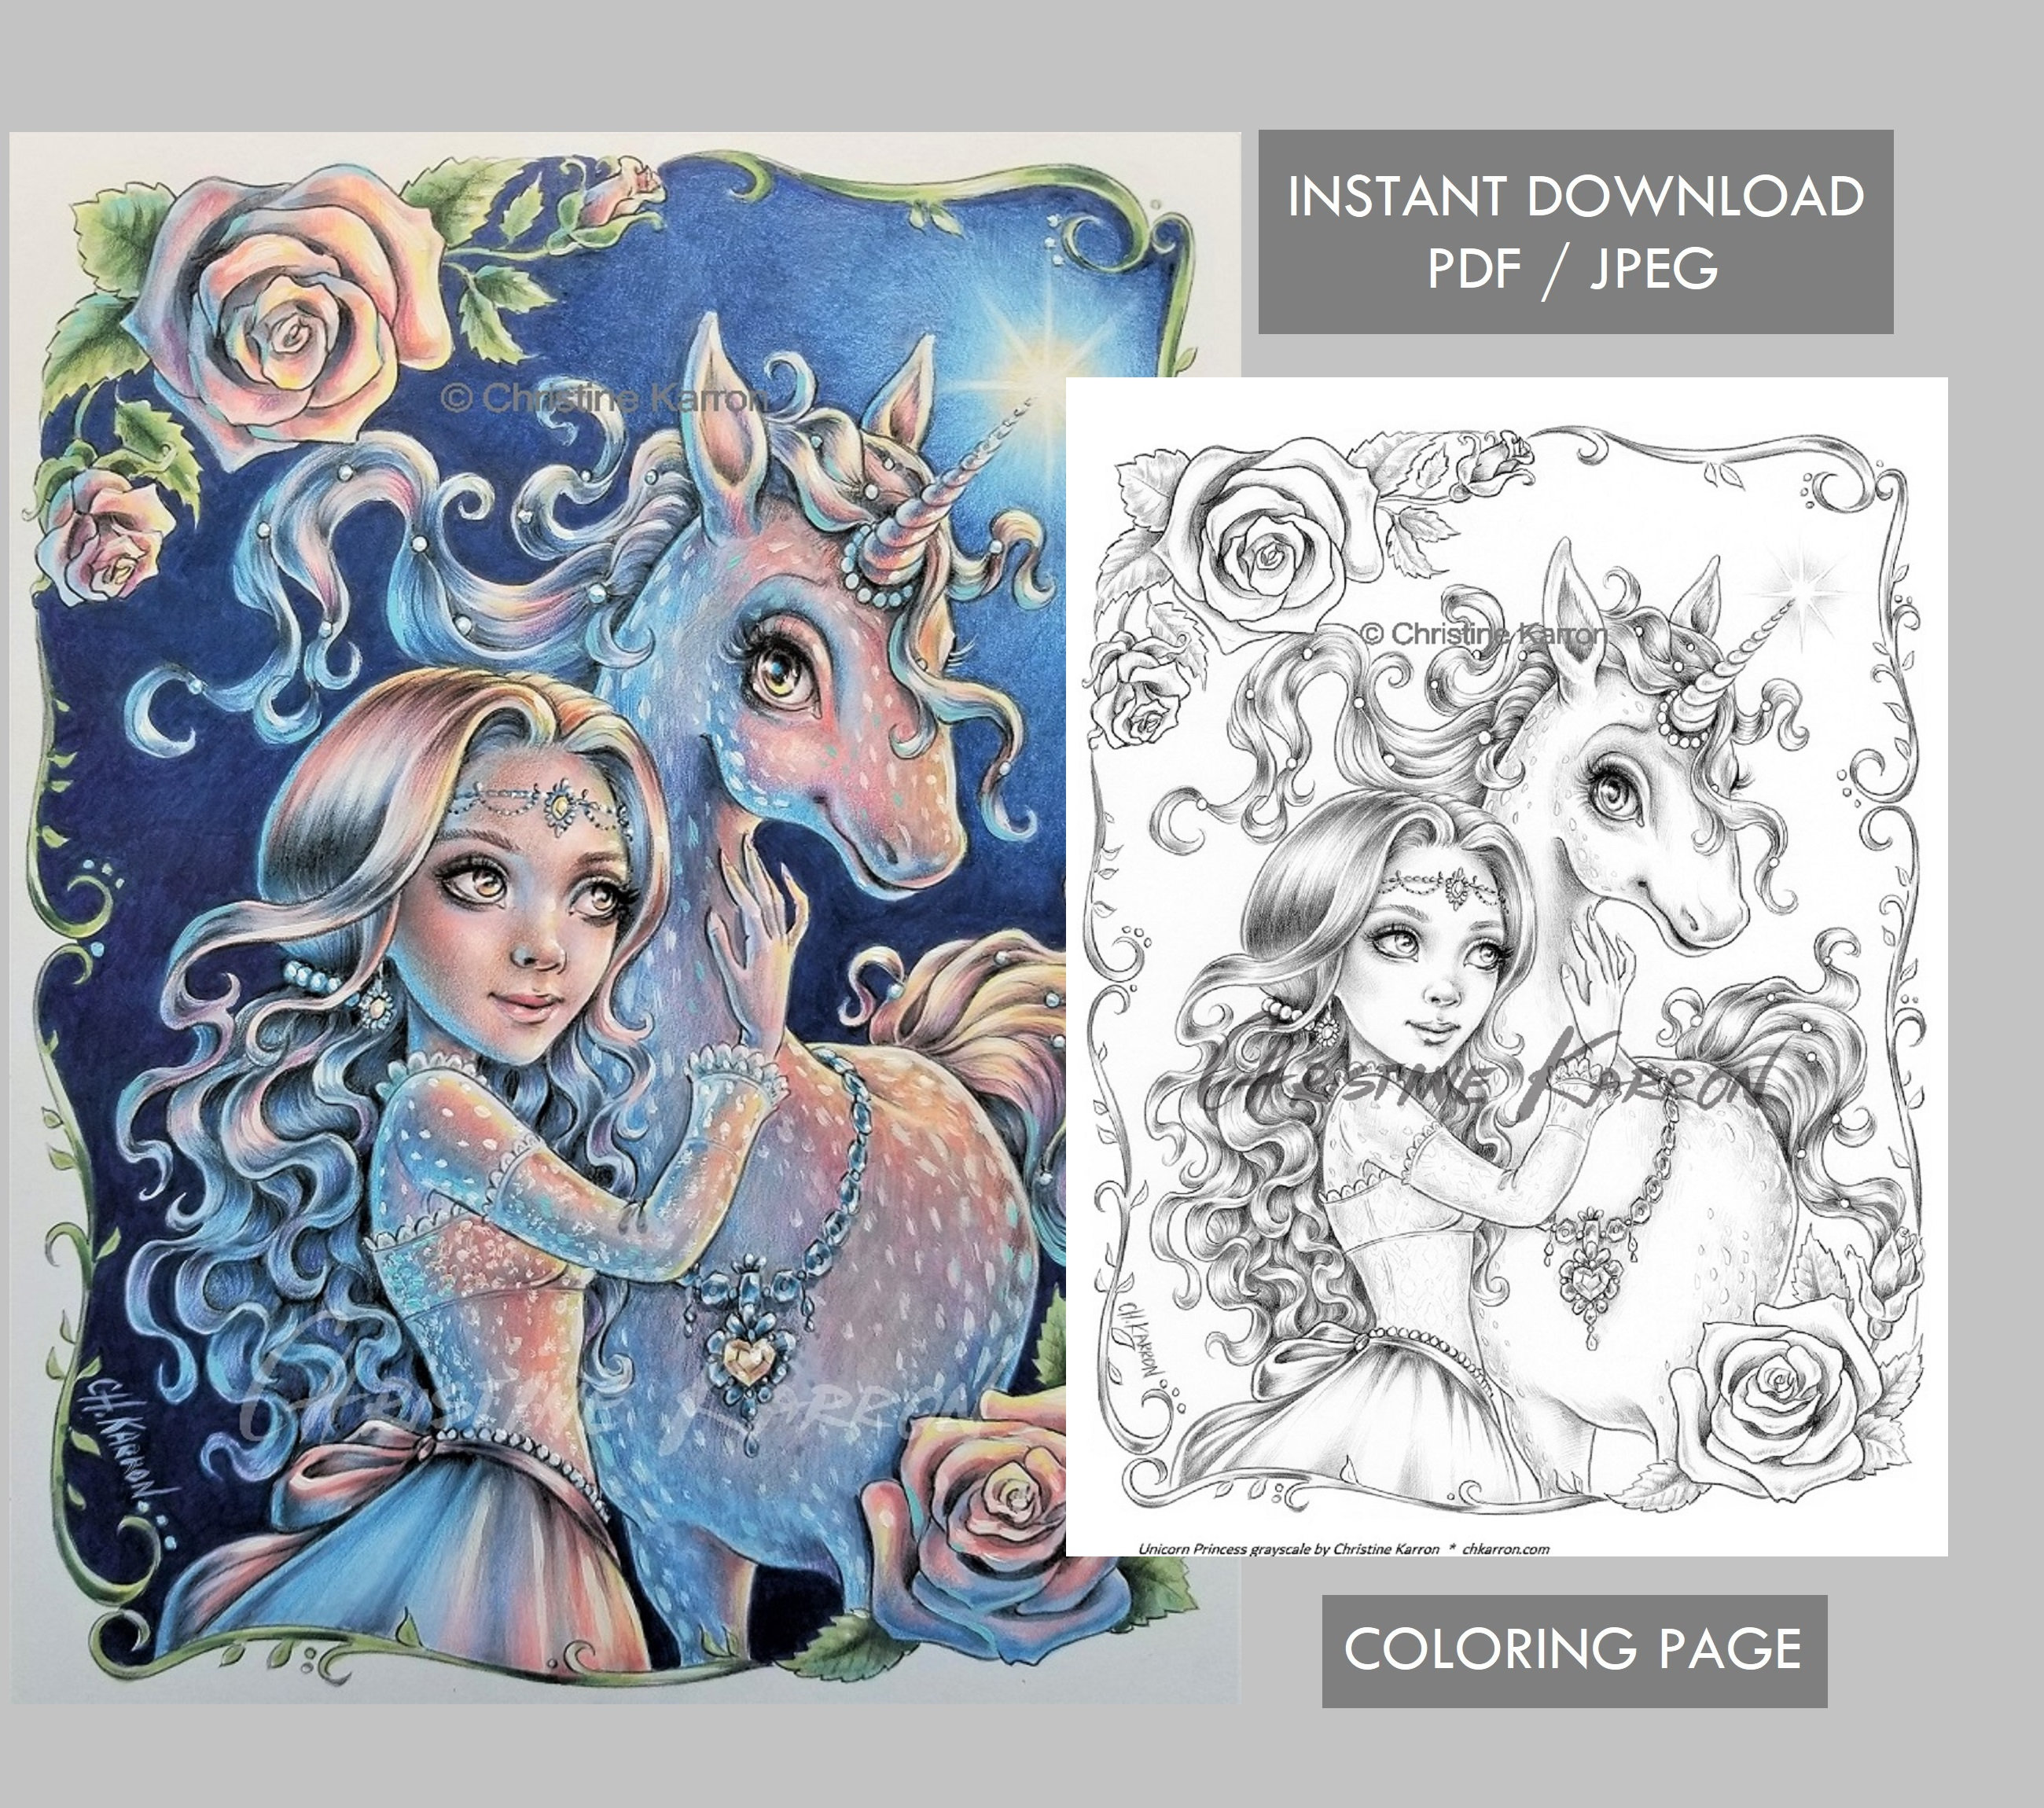 Unicorn Princess Coloring Page Grayscale Instant Download Printable File  JPEG and PDF